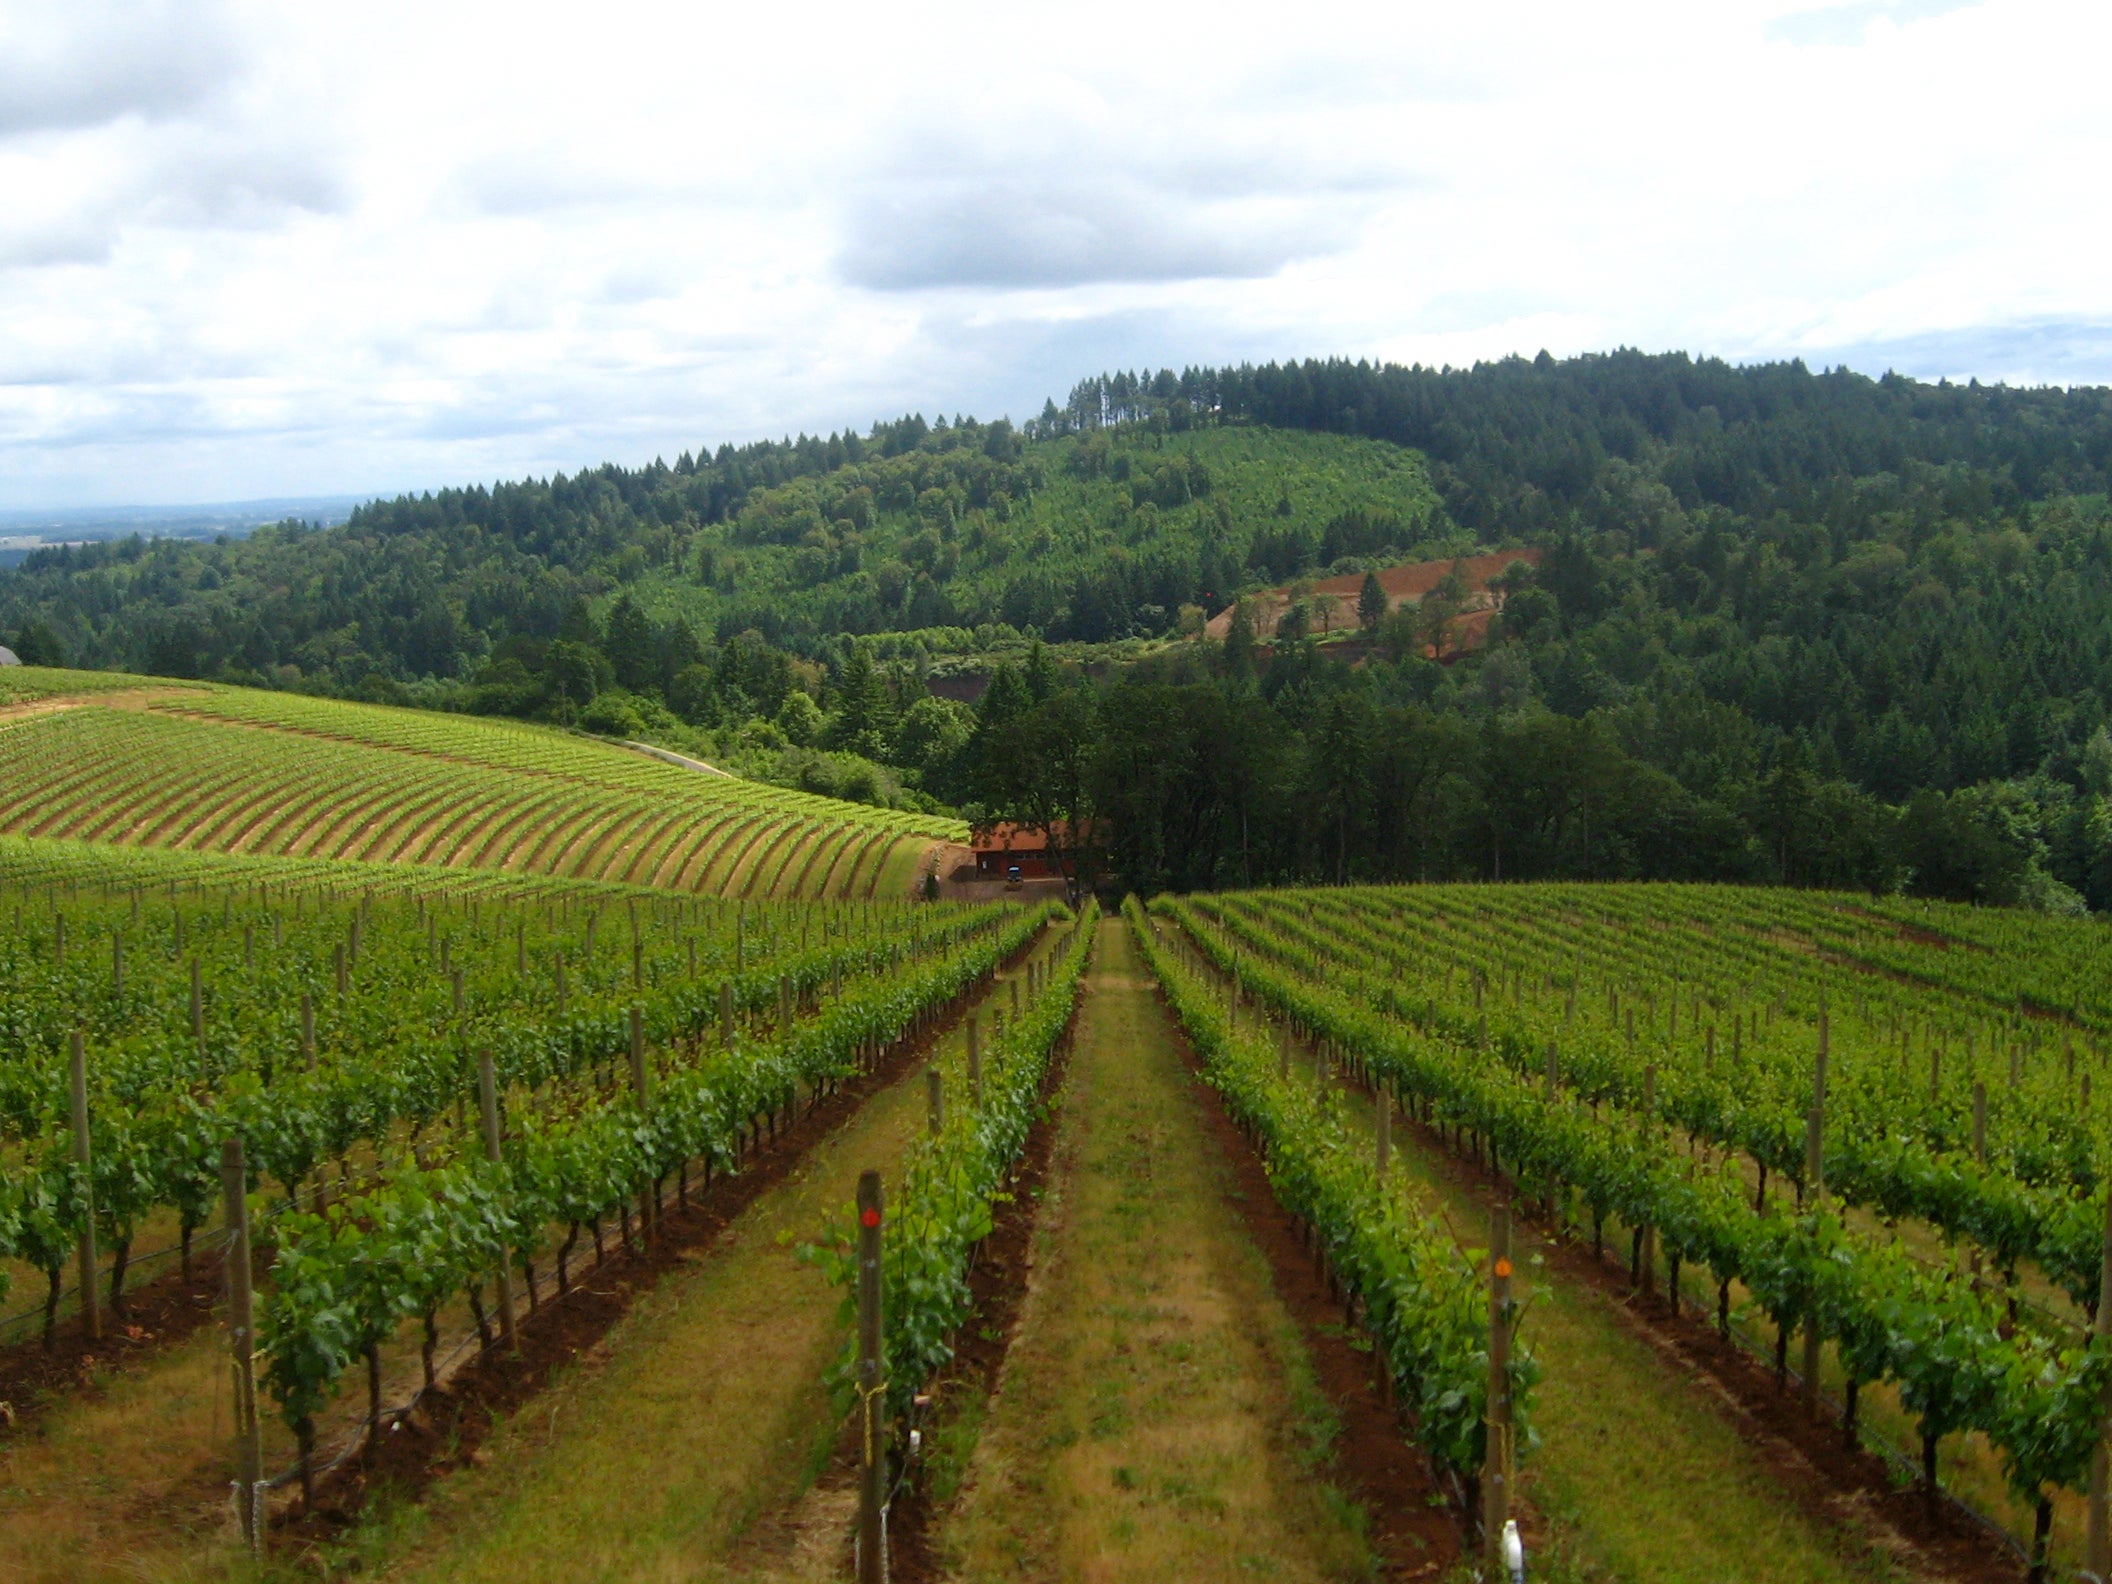 Green green grass: Willamette Valley is known for producing world-class pinot noir